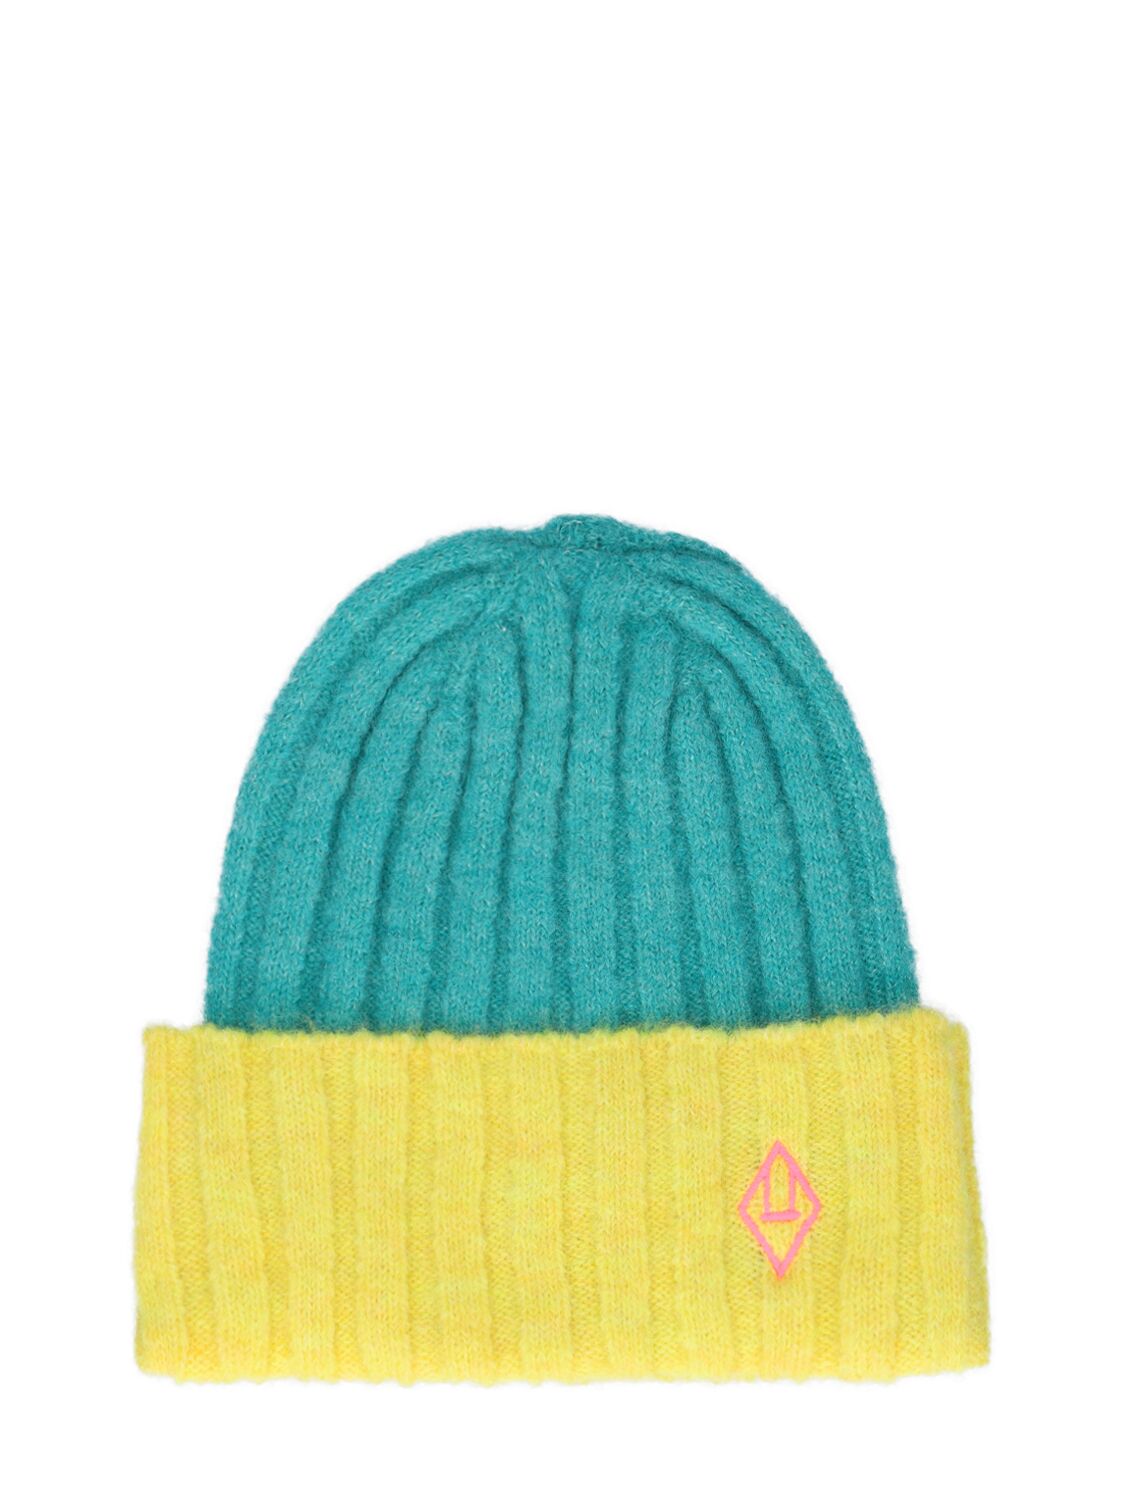 Image of Wool Blend Knit Beanie